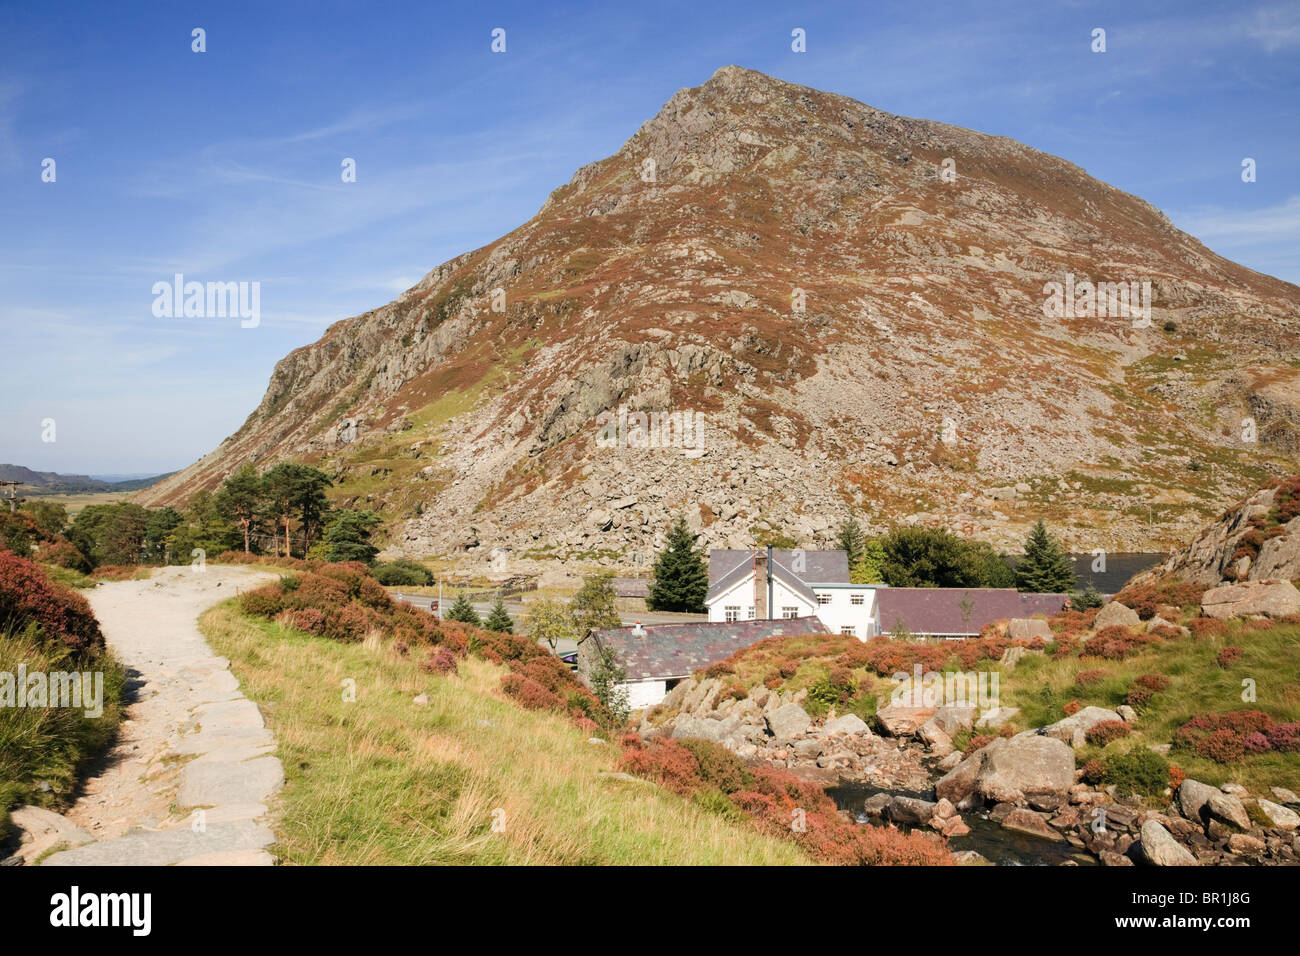 Footpath from Cwm Idwal with Ogwen Cottage below Pen Yr Ole Wen mountain. Ogwen Valley, Snowdonia, North Wales, UK, Britain. Stock Photo